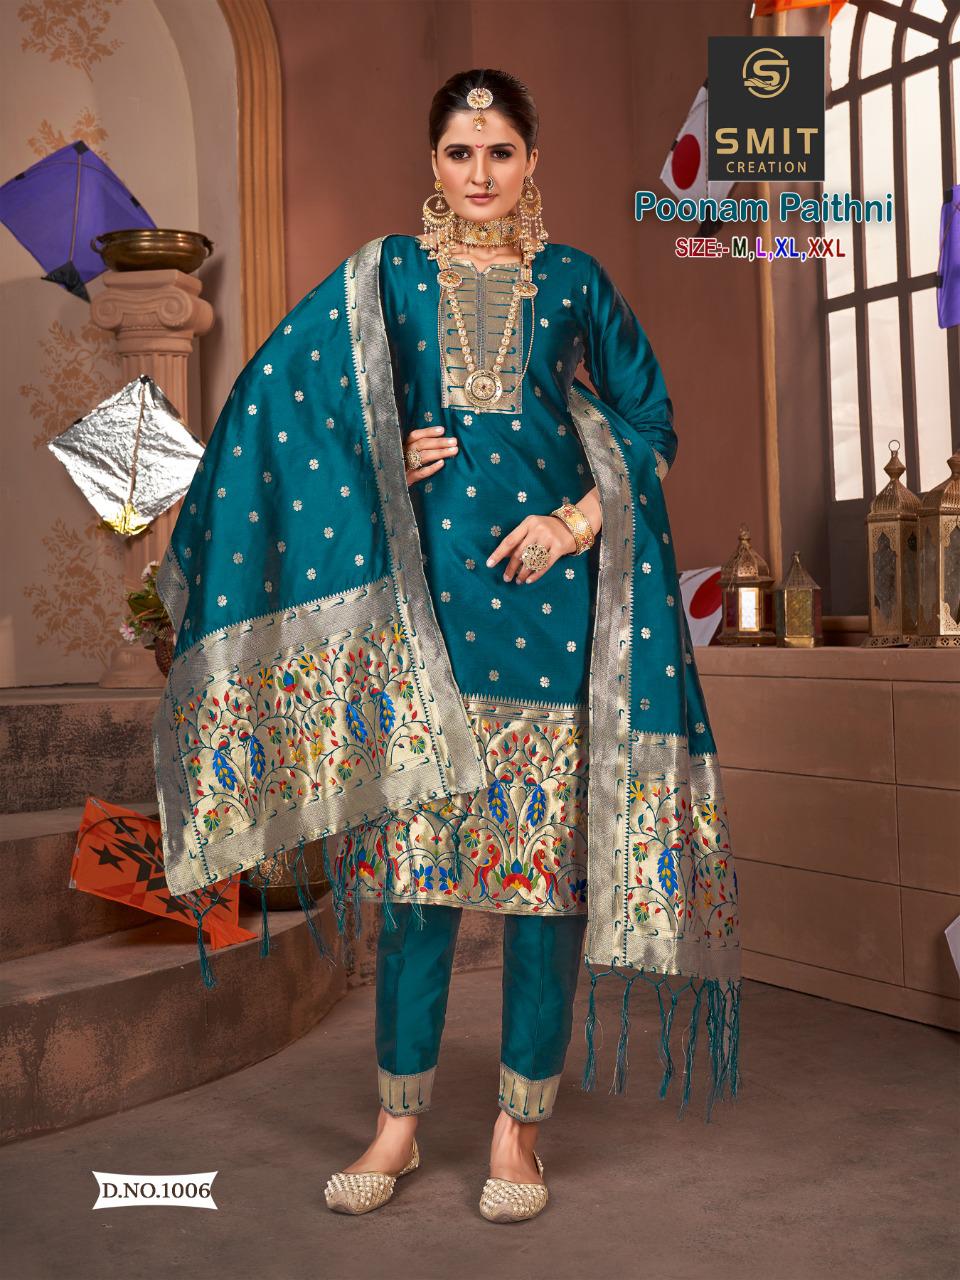 SMIT CREATION DREAM PAITHANI BY POONAM SILK READYMADE PAITHANI SUITS -  textiledeal.in